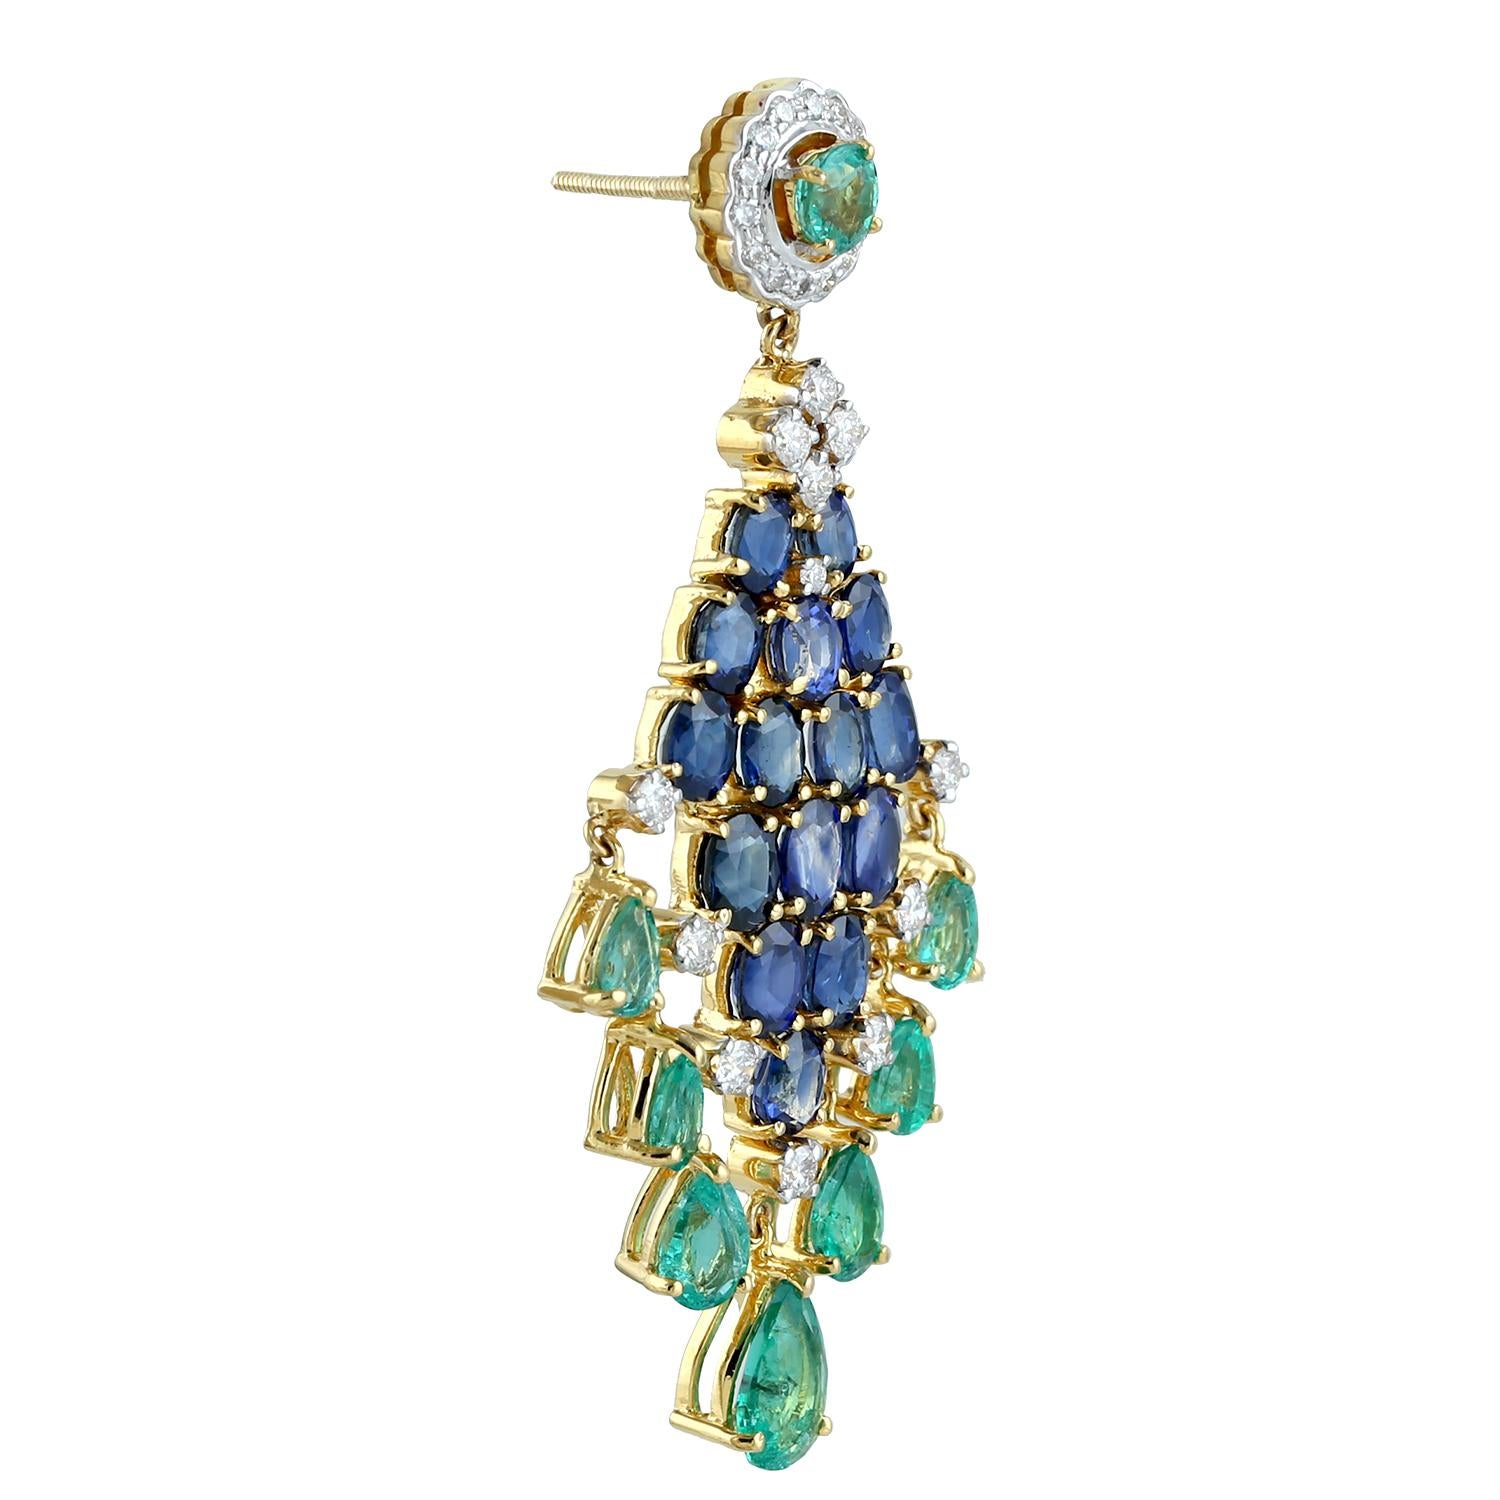 Cast from 18-karat gold.  These beautiful chandelier earrings are hand set with 7.7 carats emerald, 8.51 carats blue sapphire and 1.25 carats of sparkling diamonds.

FOLLOW  MEGHNA JEWELS storefront to view the latest collection & exclusive pieces. 